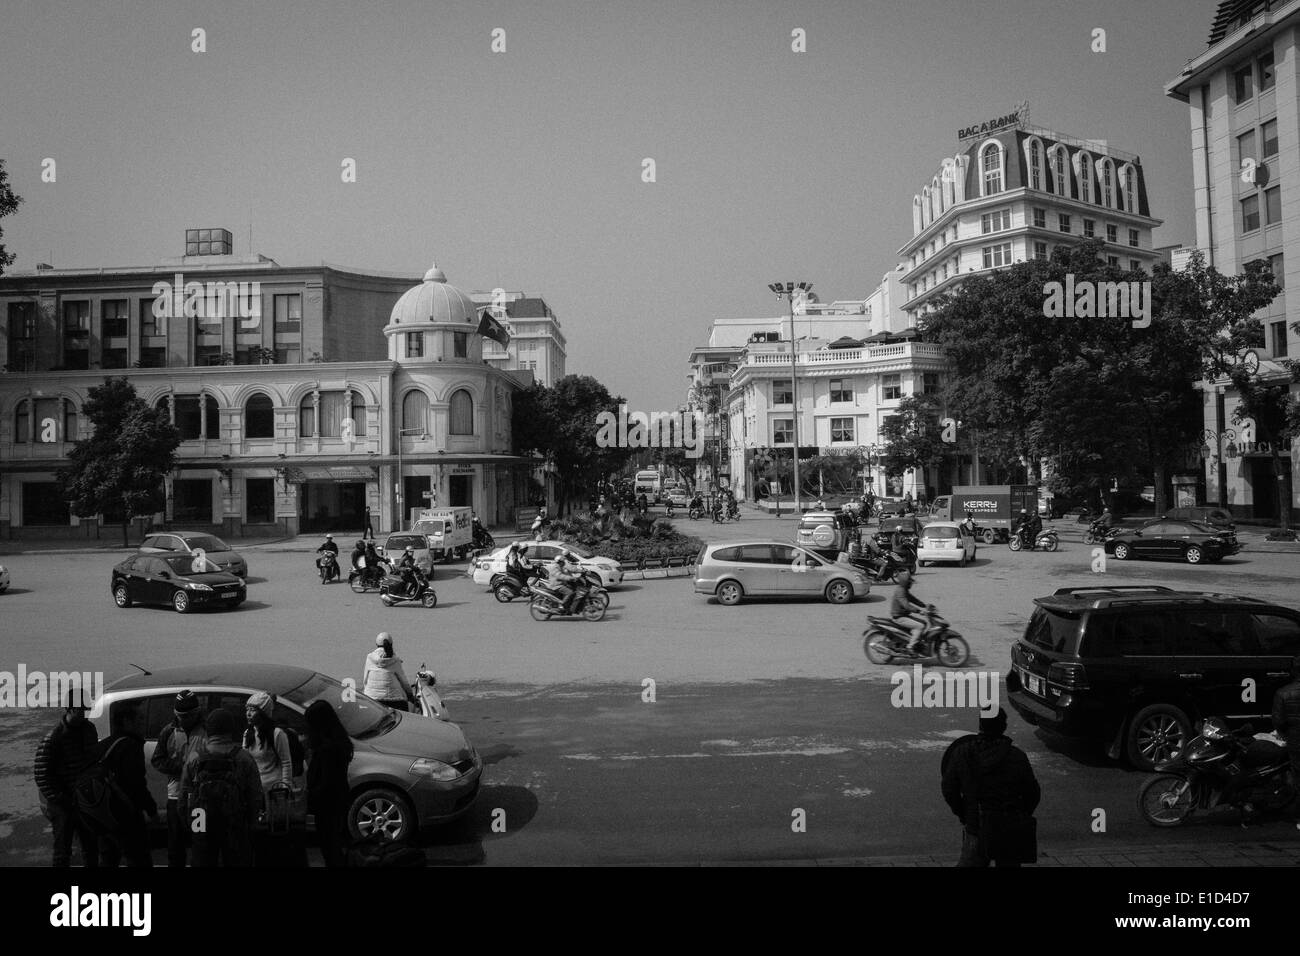 Street scene in Hanoi, Vietnam, with cars, motorbikes and bicycles viewed from the front of the Hanoi Opera House. Stock Photo